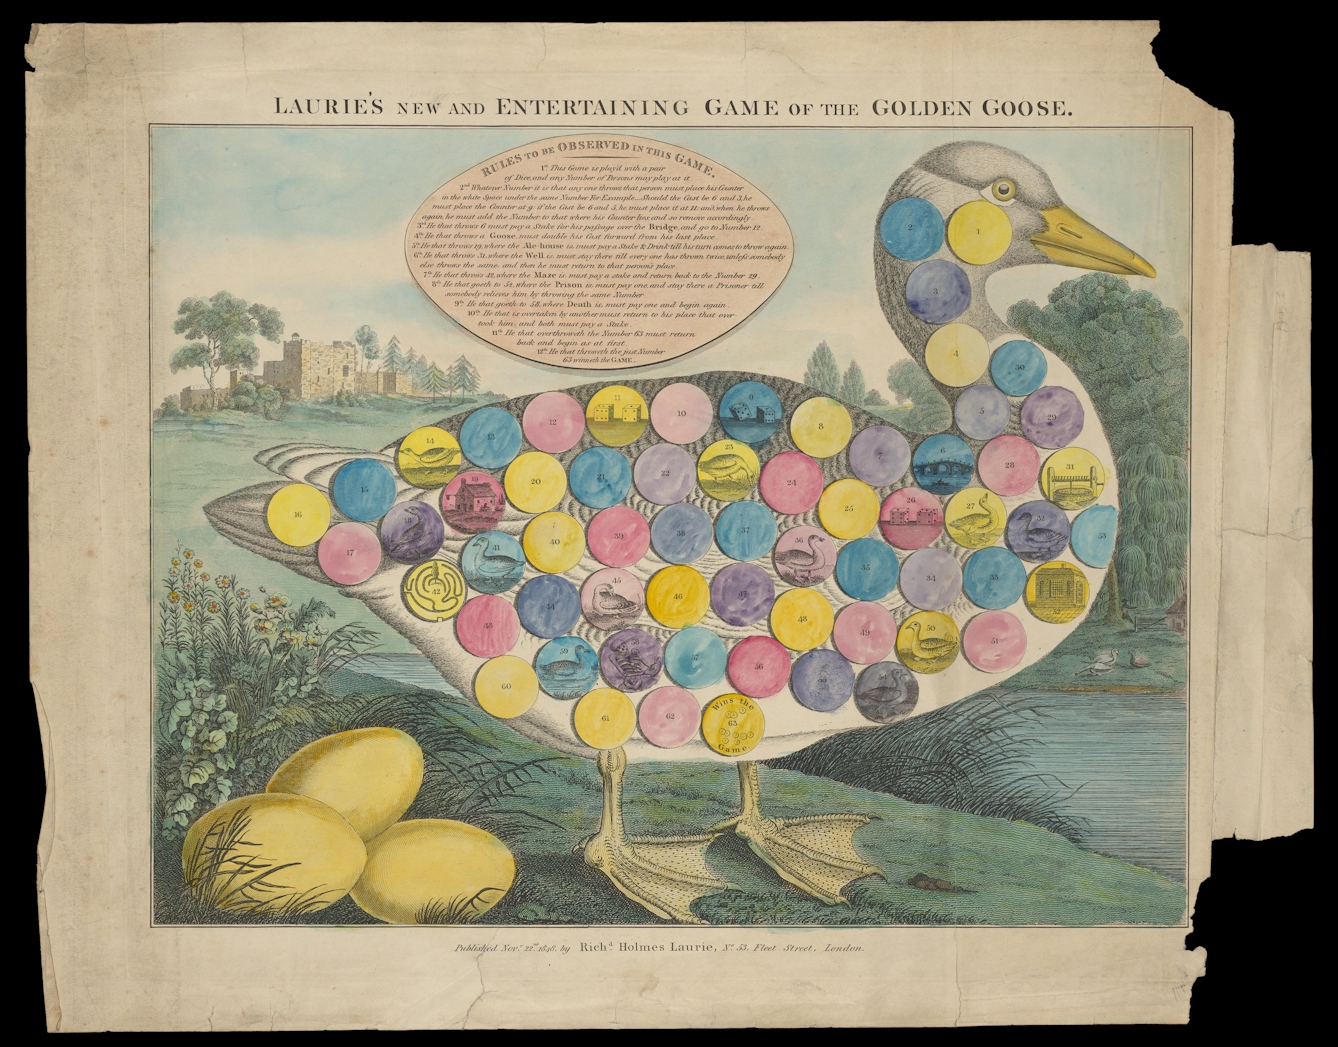 Photograph of a coloured engraving from 1848 depicting a large goose with three golden eggs. Numbered circles are printed on the body of the goose for playing the game of goose. 